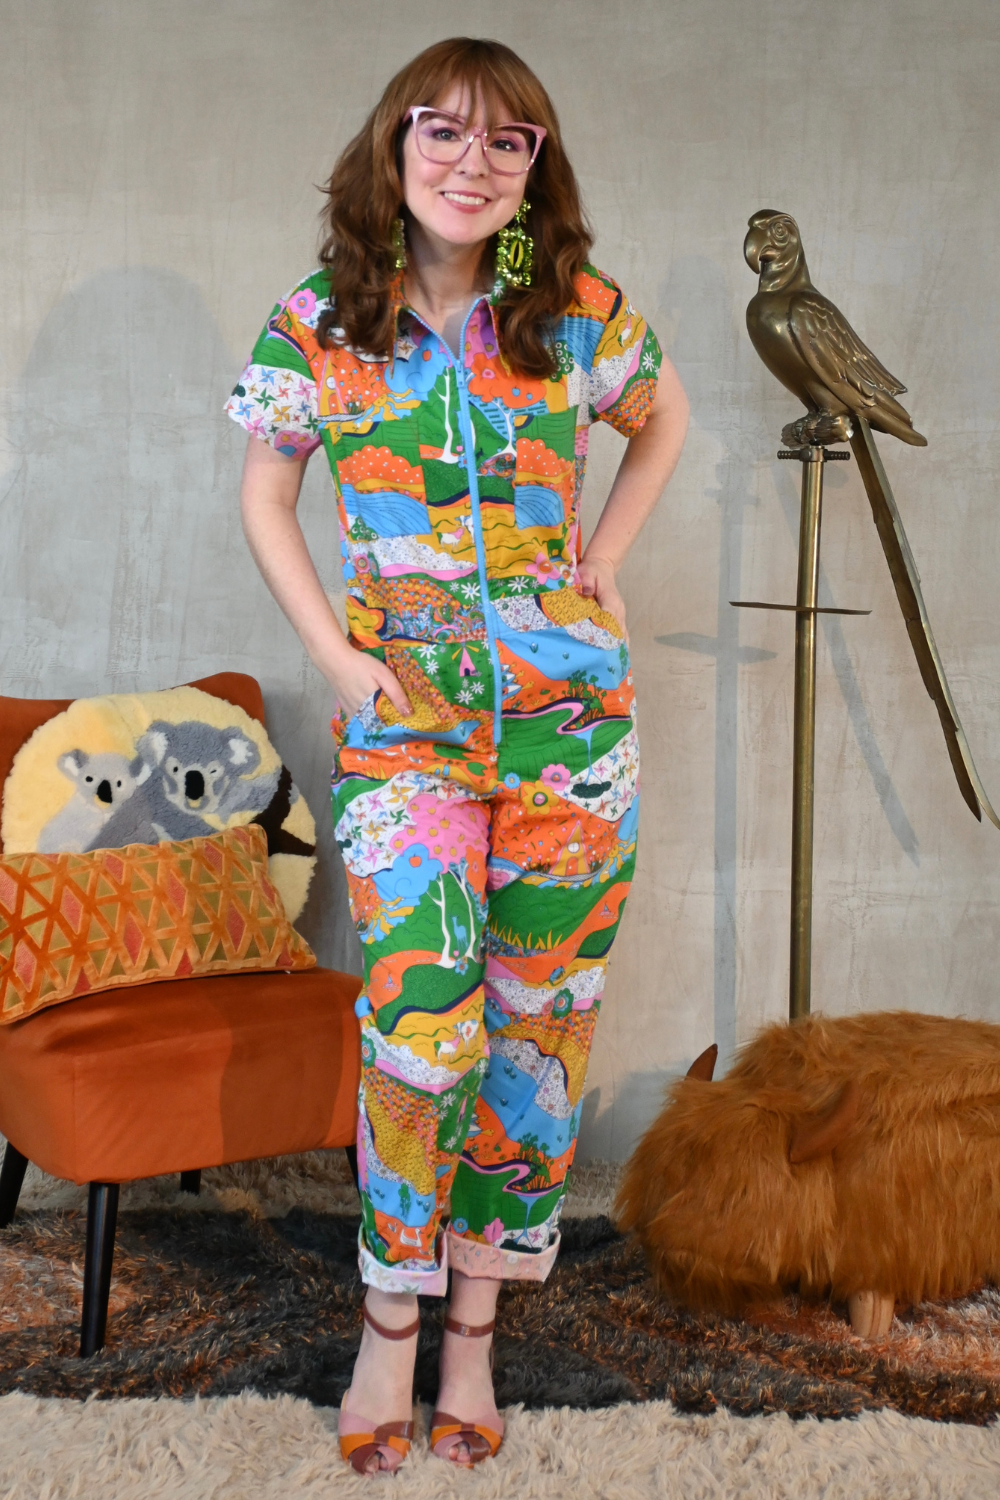 Girl with glasses wearing rainbow print jumpsuit, standing next to metal parrot